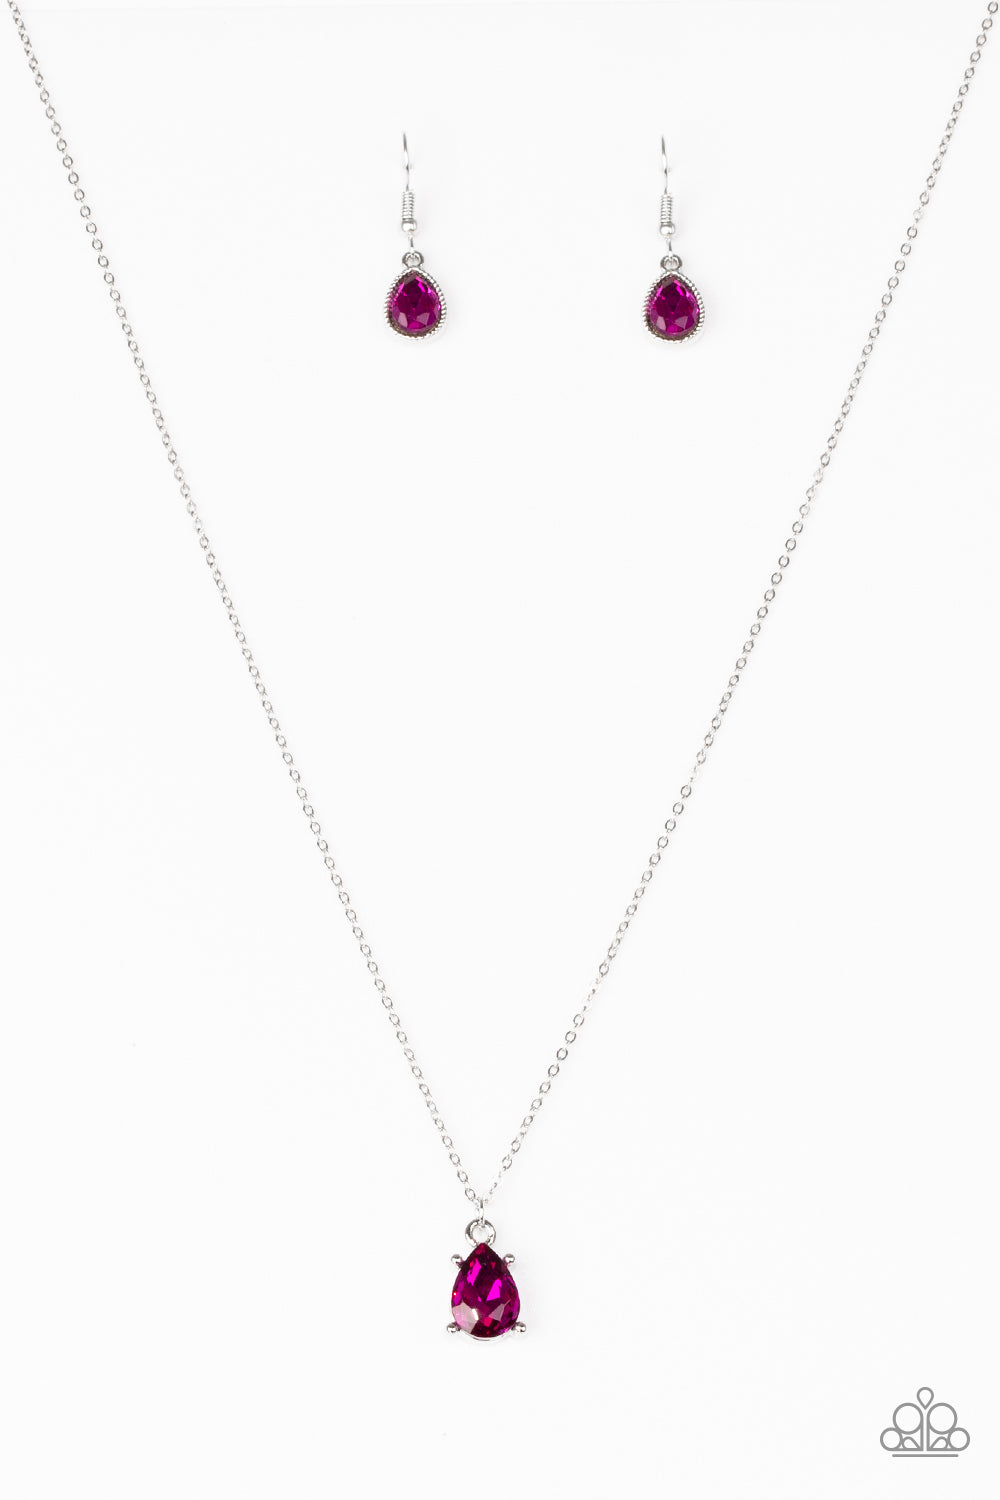 five-dollar-jewelry-classy-classicist-pink-necklace-paparazzi-accessories